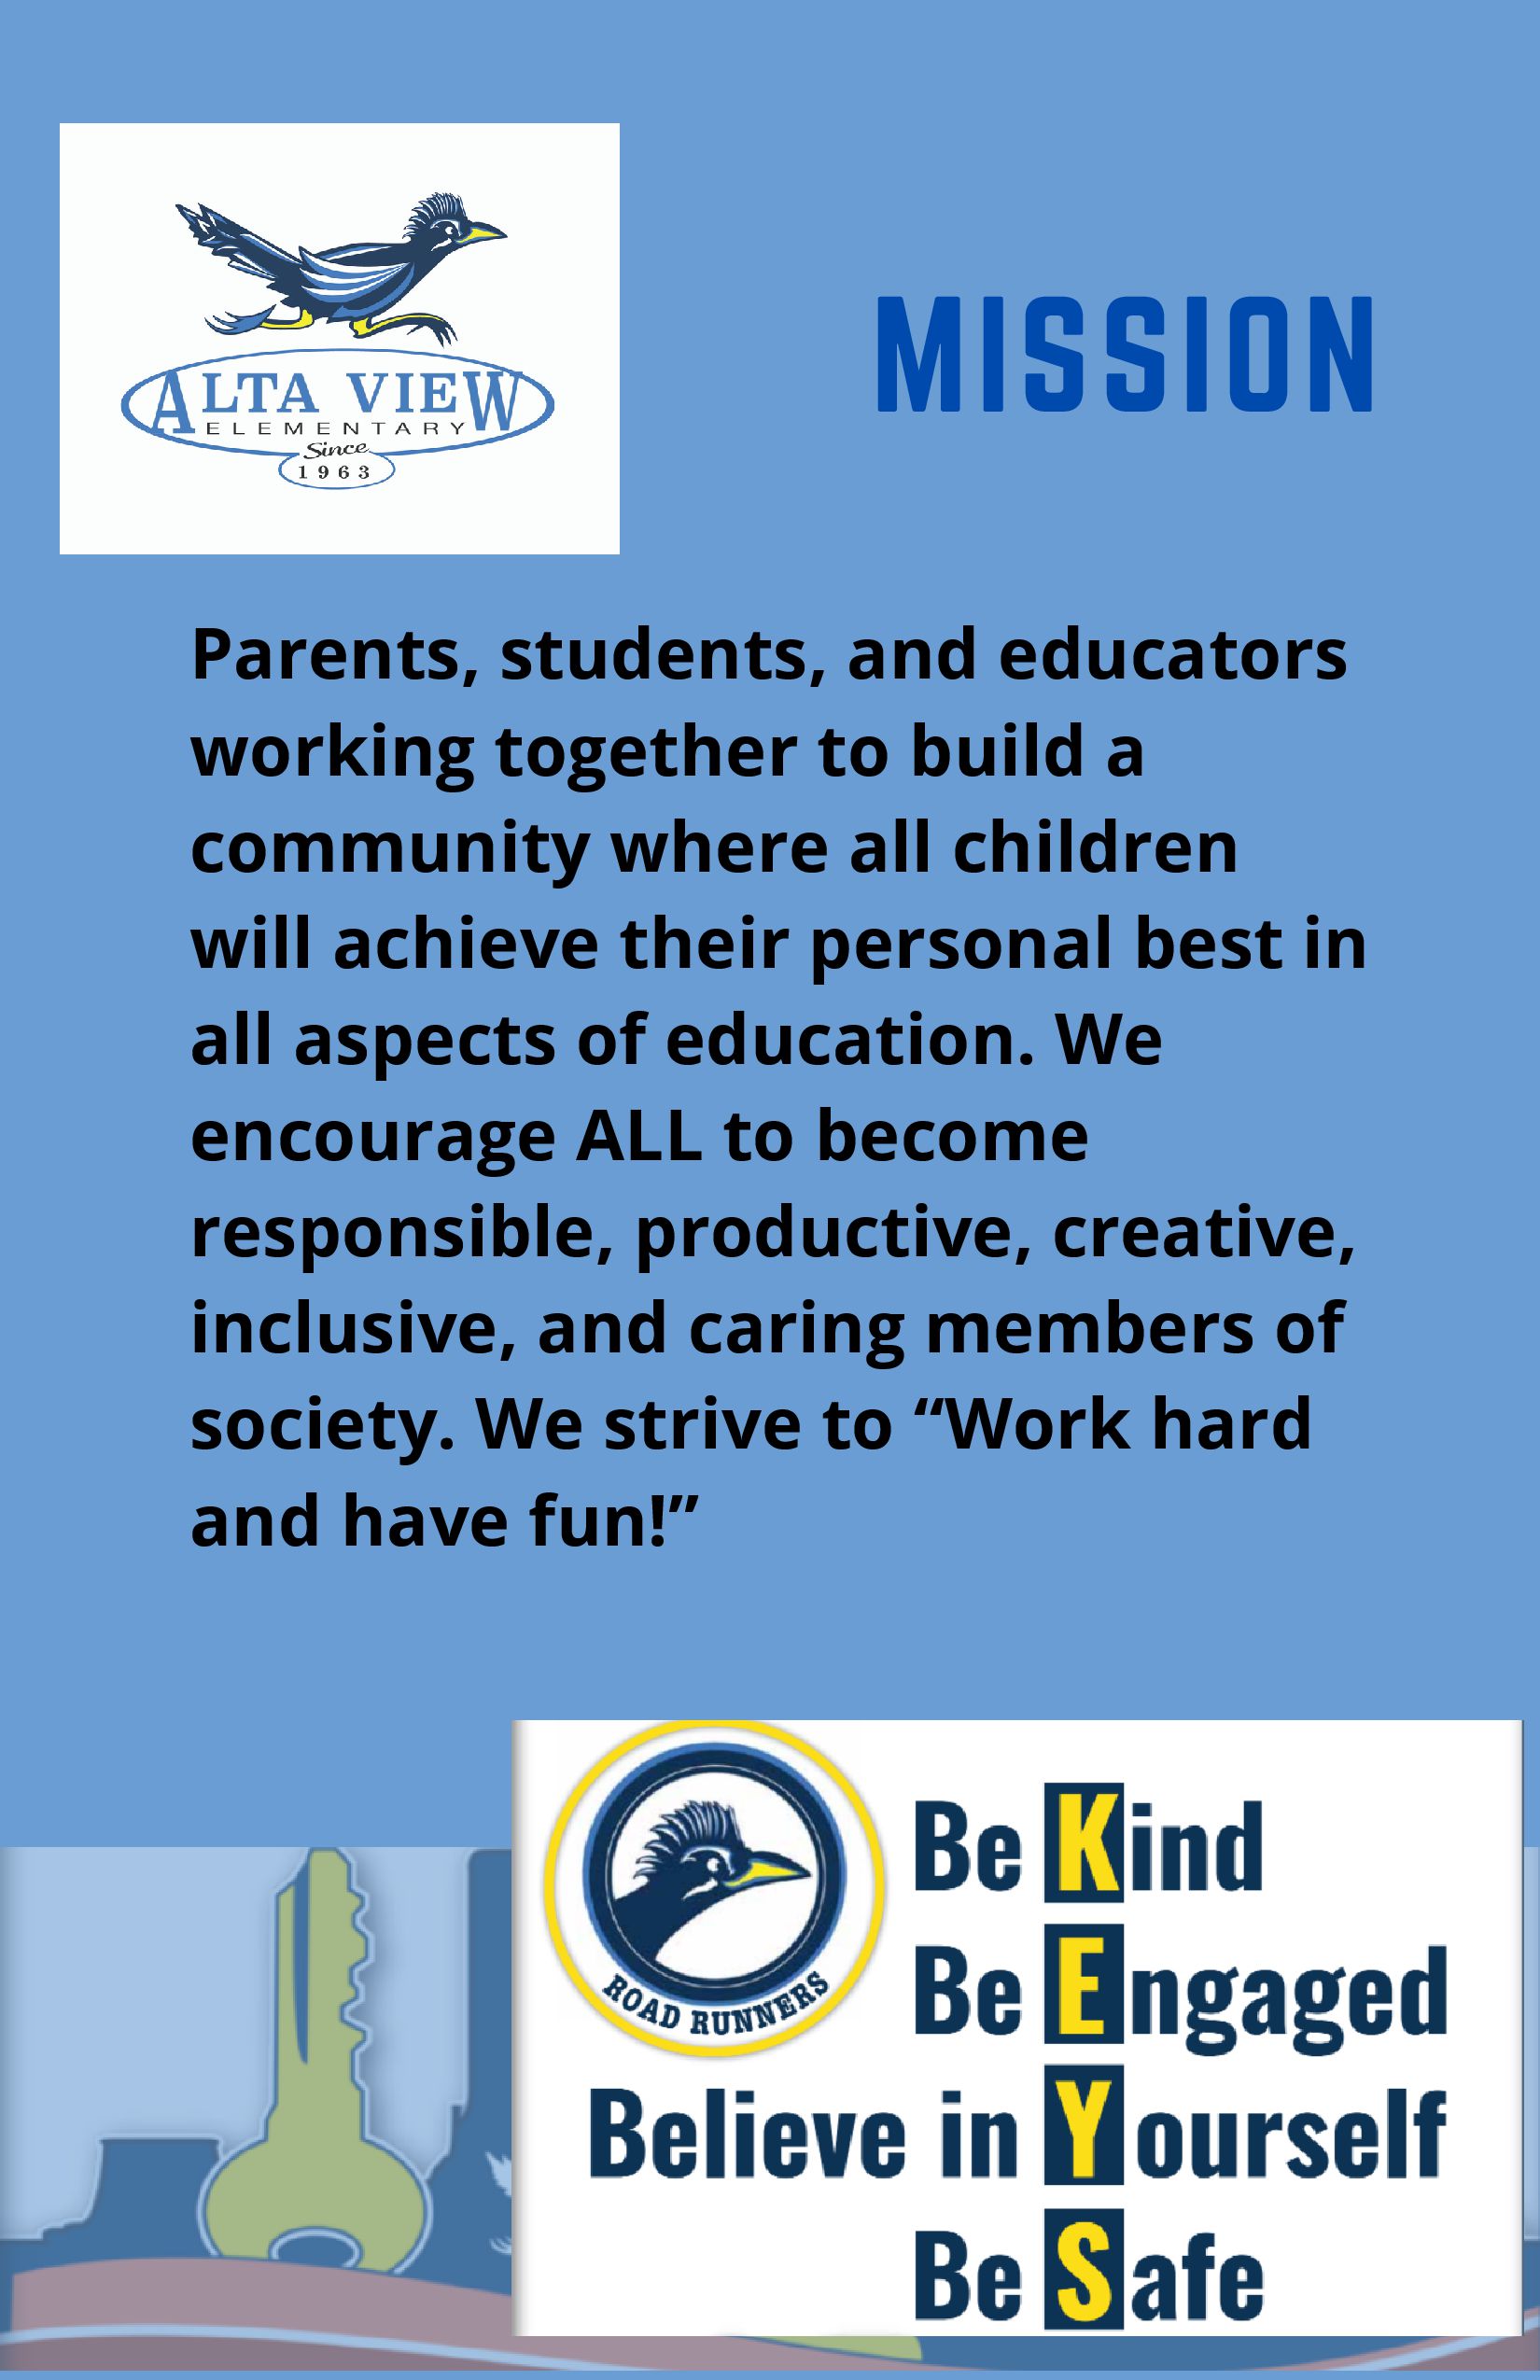 Parents, students, and educators working together to build a community where all children will achieve their personal best in all aspects of education. We encourage ALL to become responsible, productive, creative, inclusive, and caring members of society. We strive to “Work hard and have fun!”